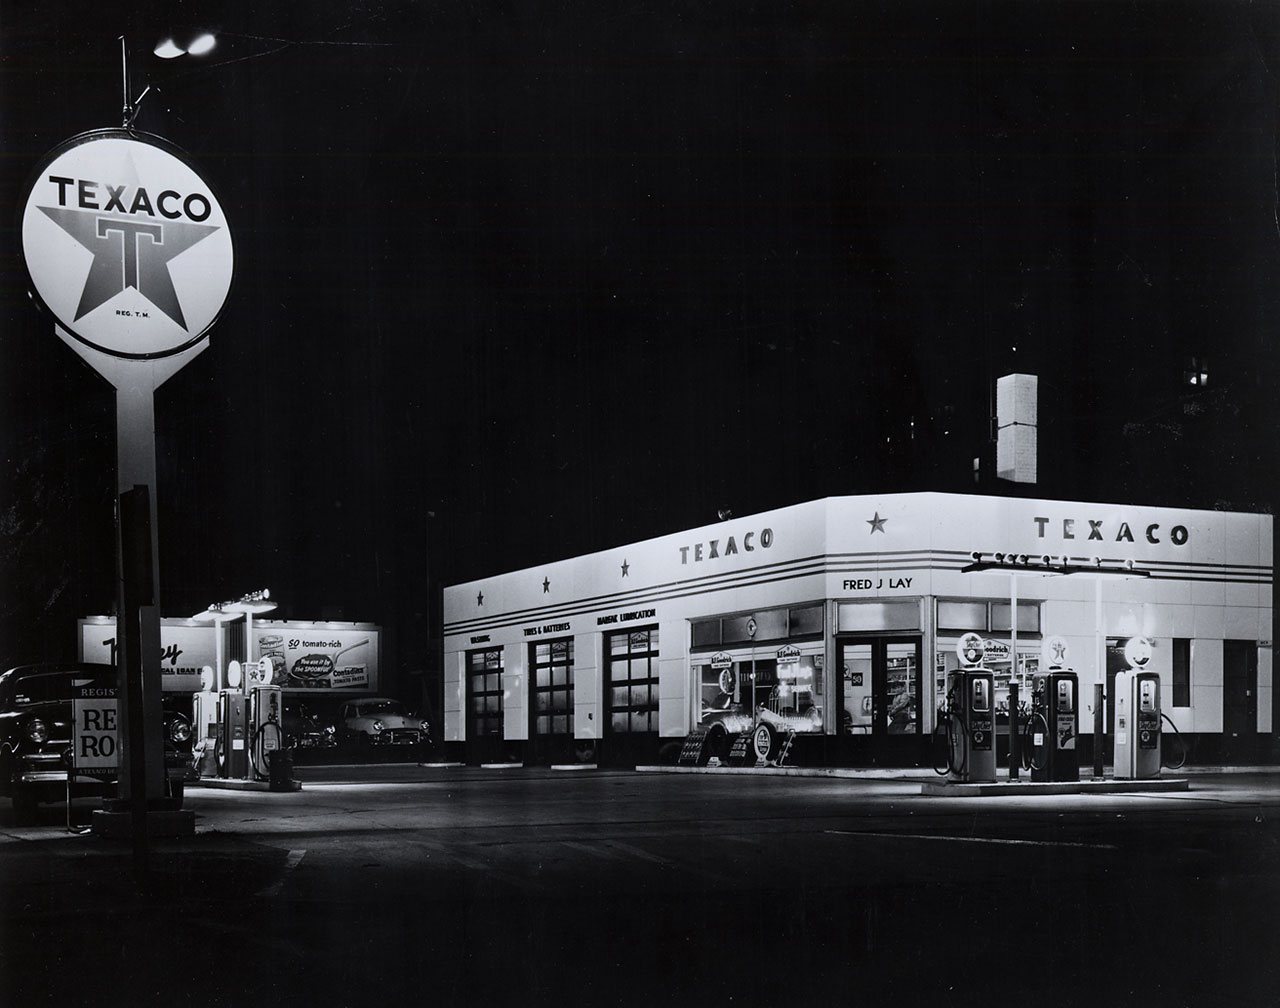 Texaco Gainesville, US, 24 hour gas station